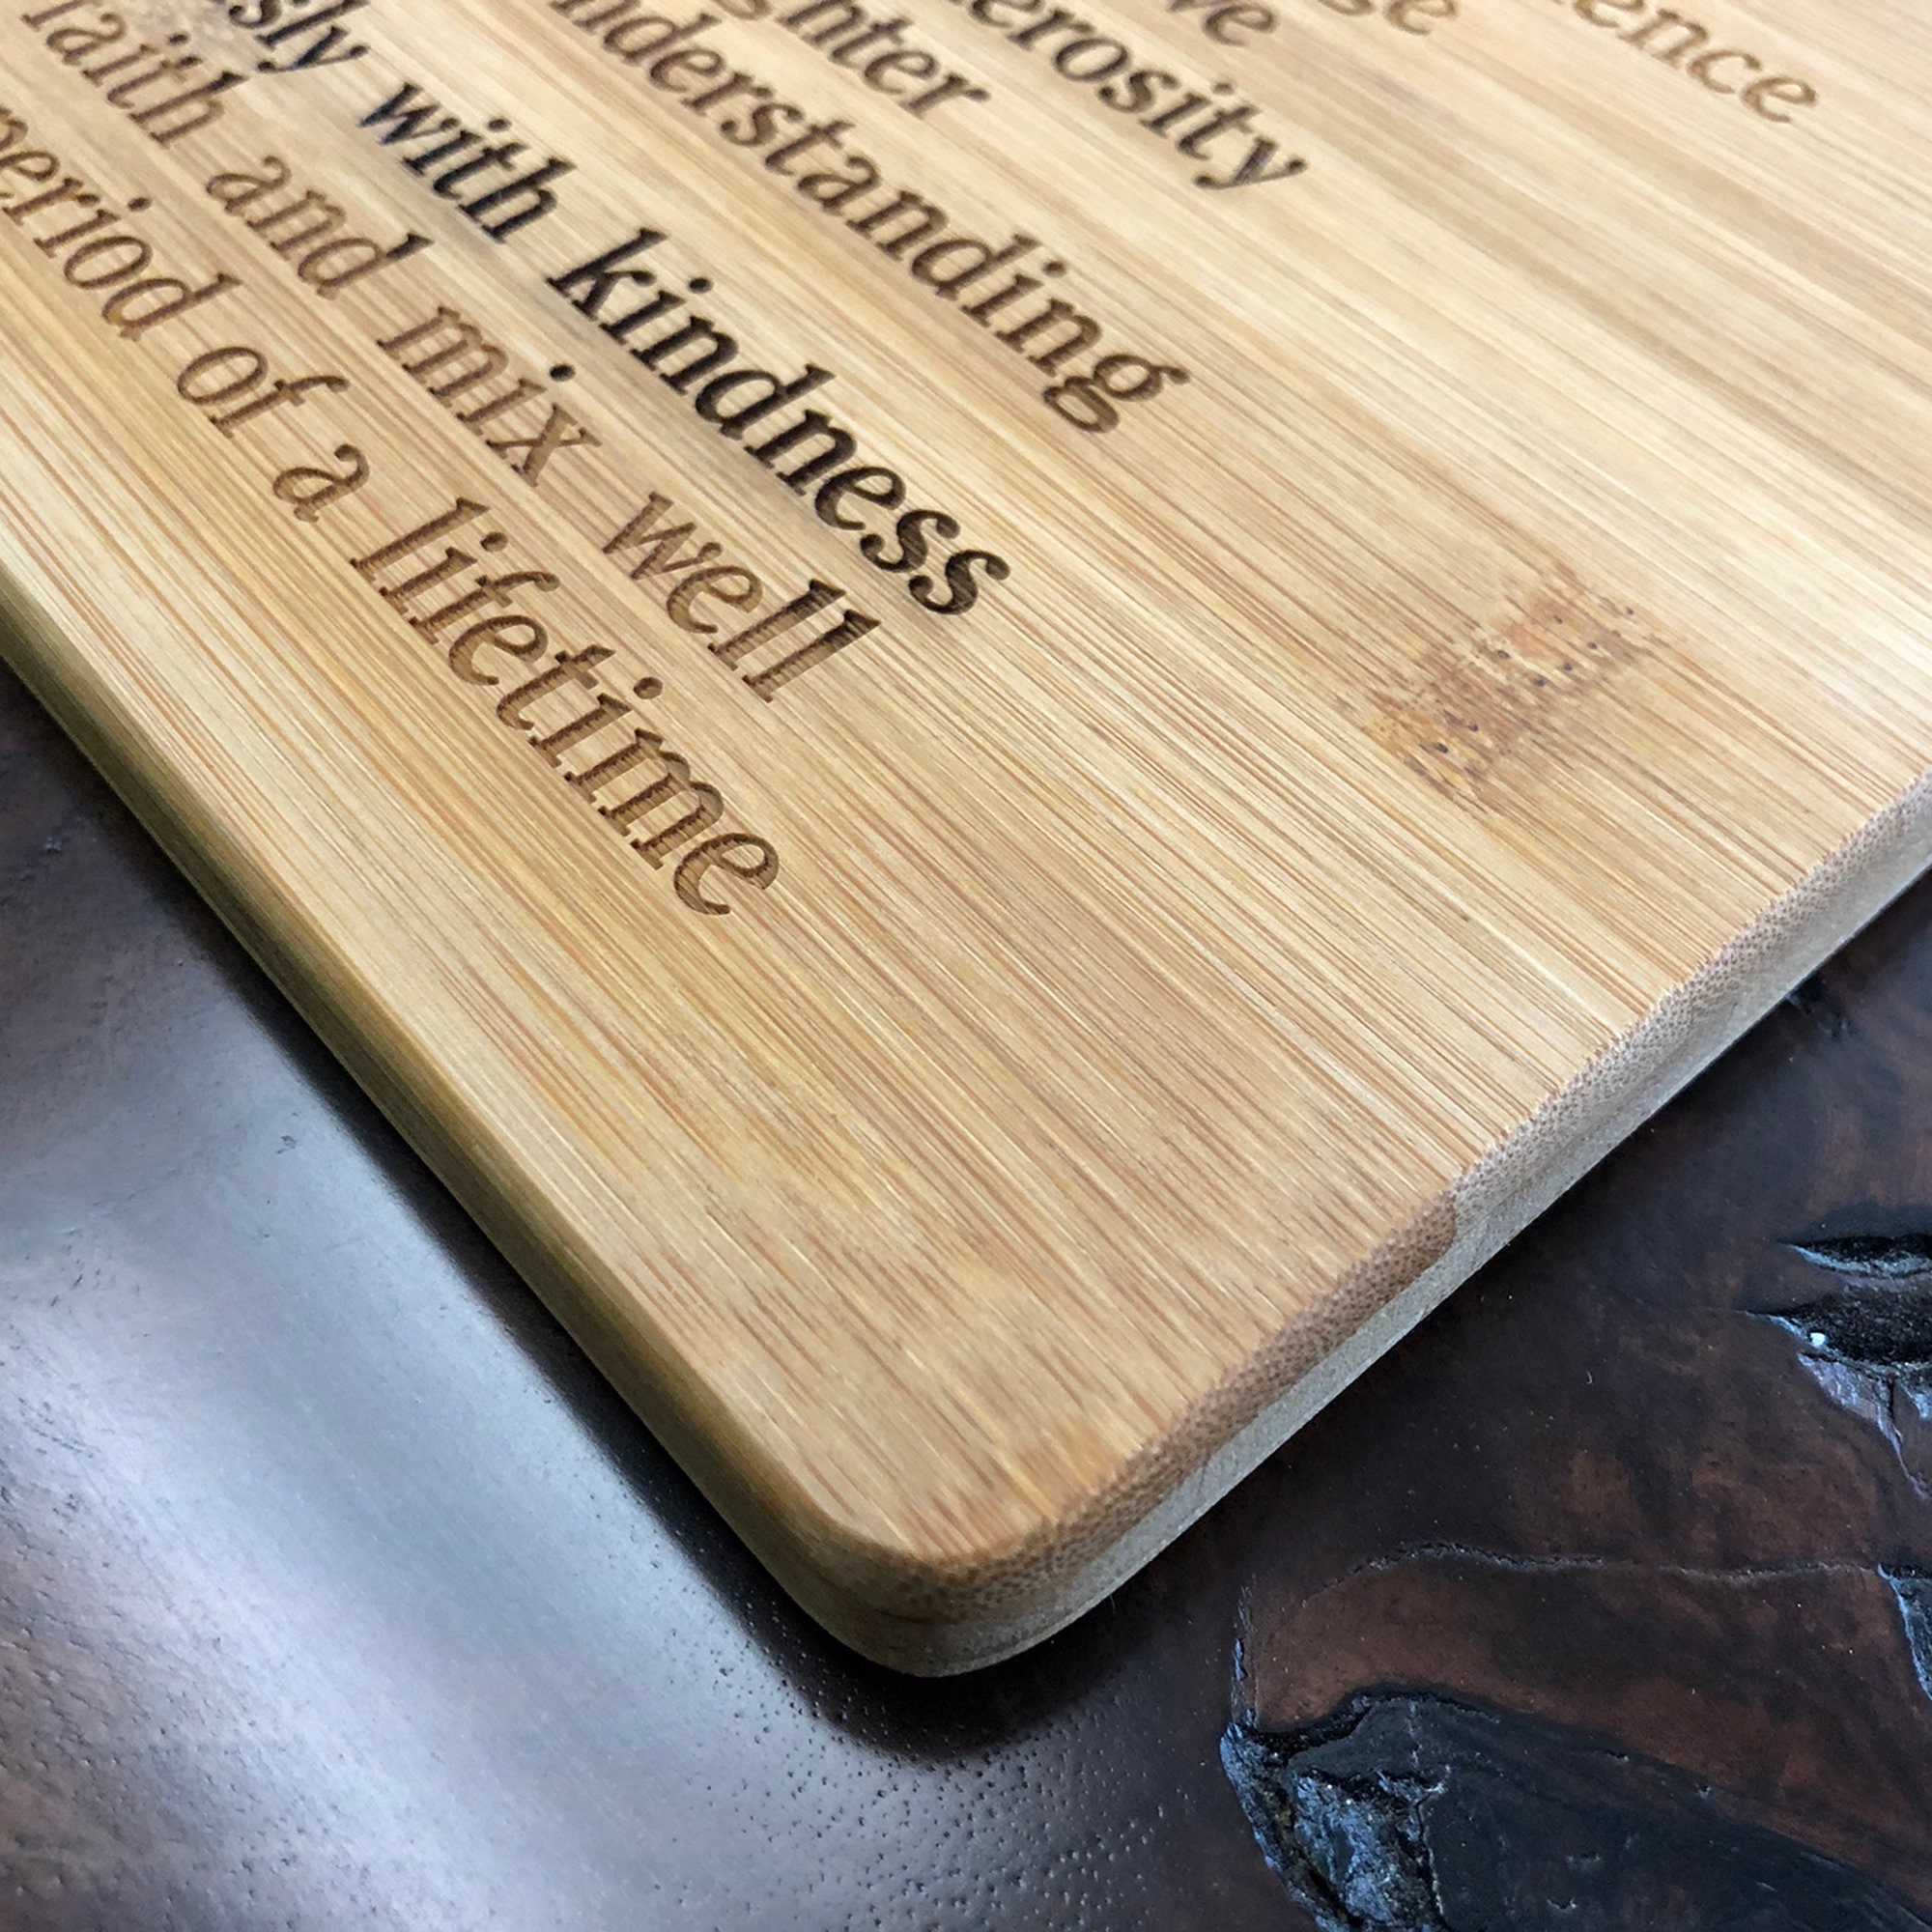 A Special Mom Recipe Cutting Board. Gift For Mom. – C & A